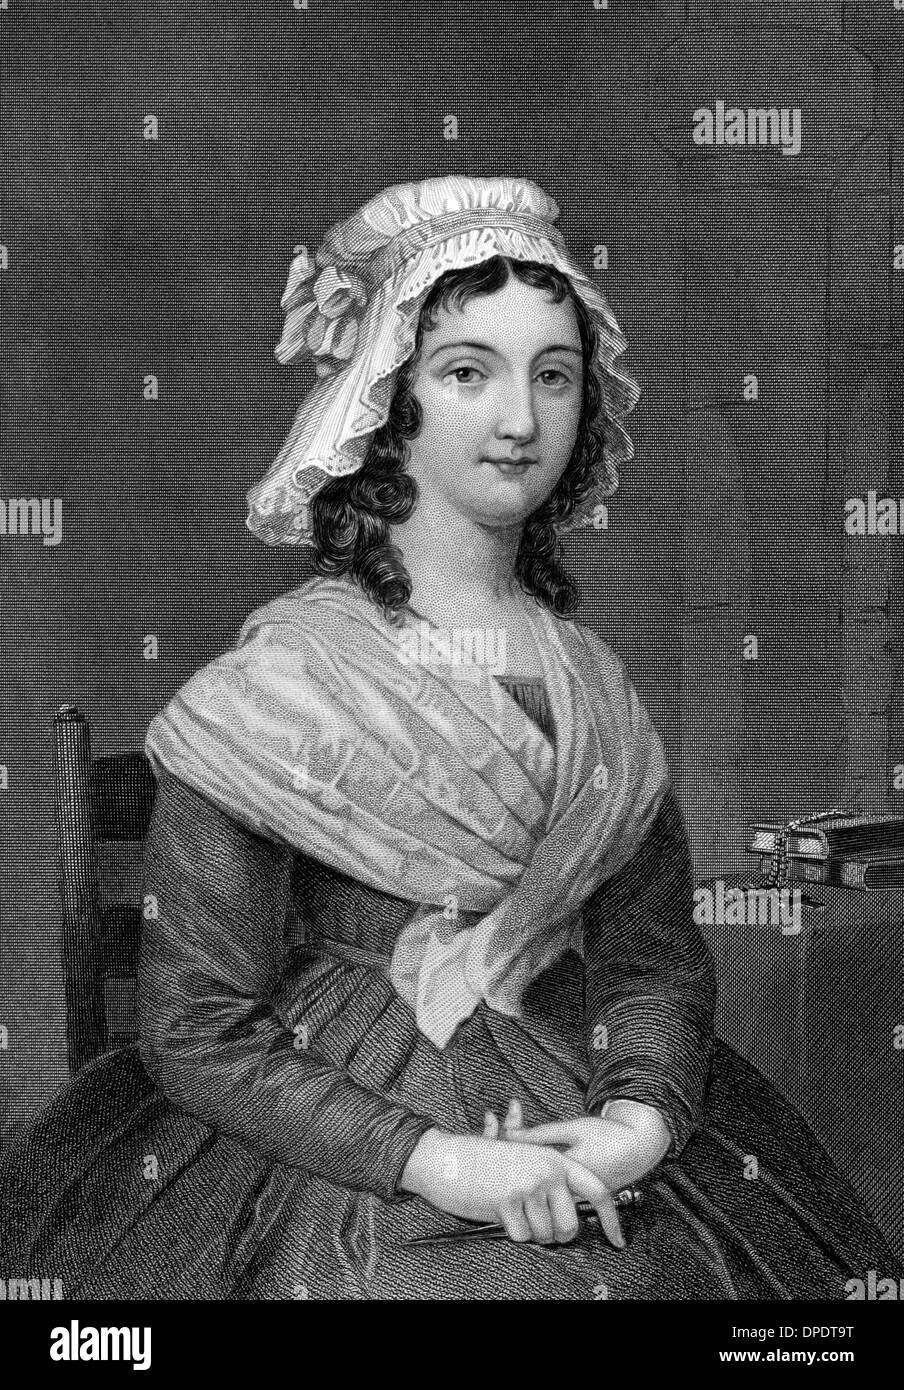 Charlotte Corday (1768-1793) on engraving from 1873. Stock Photo